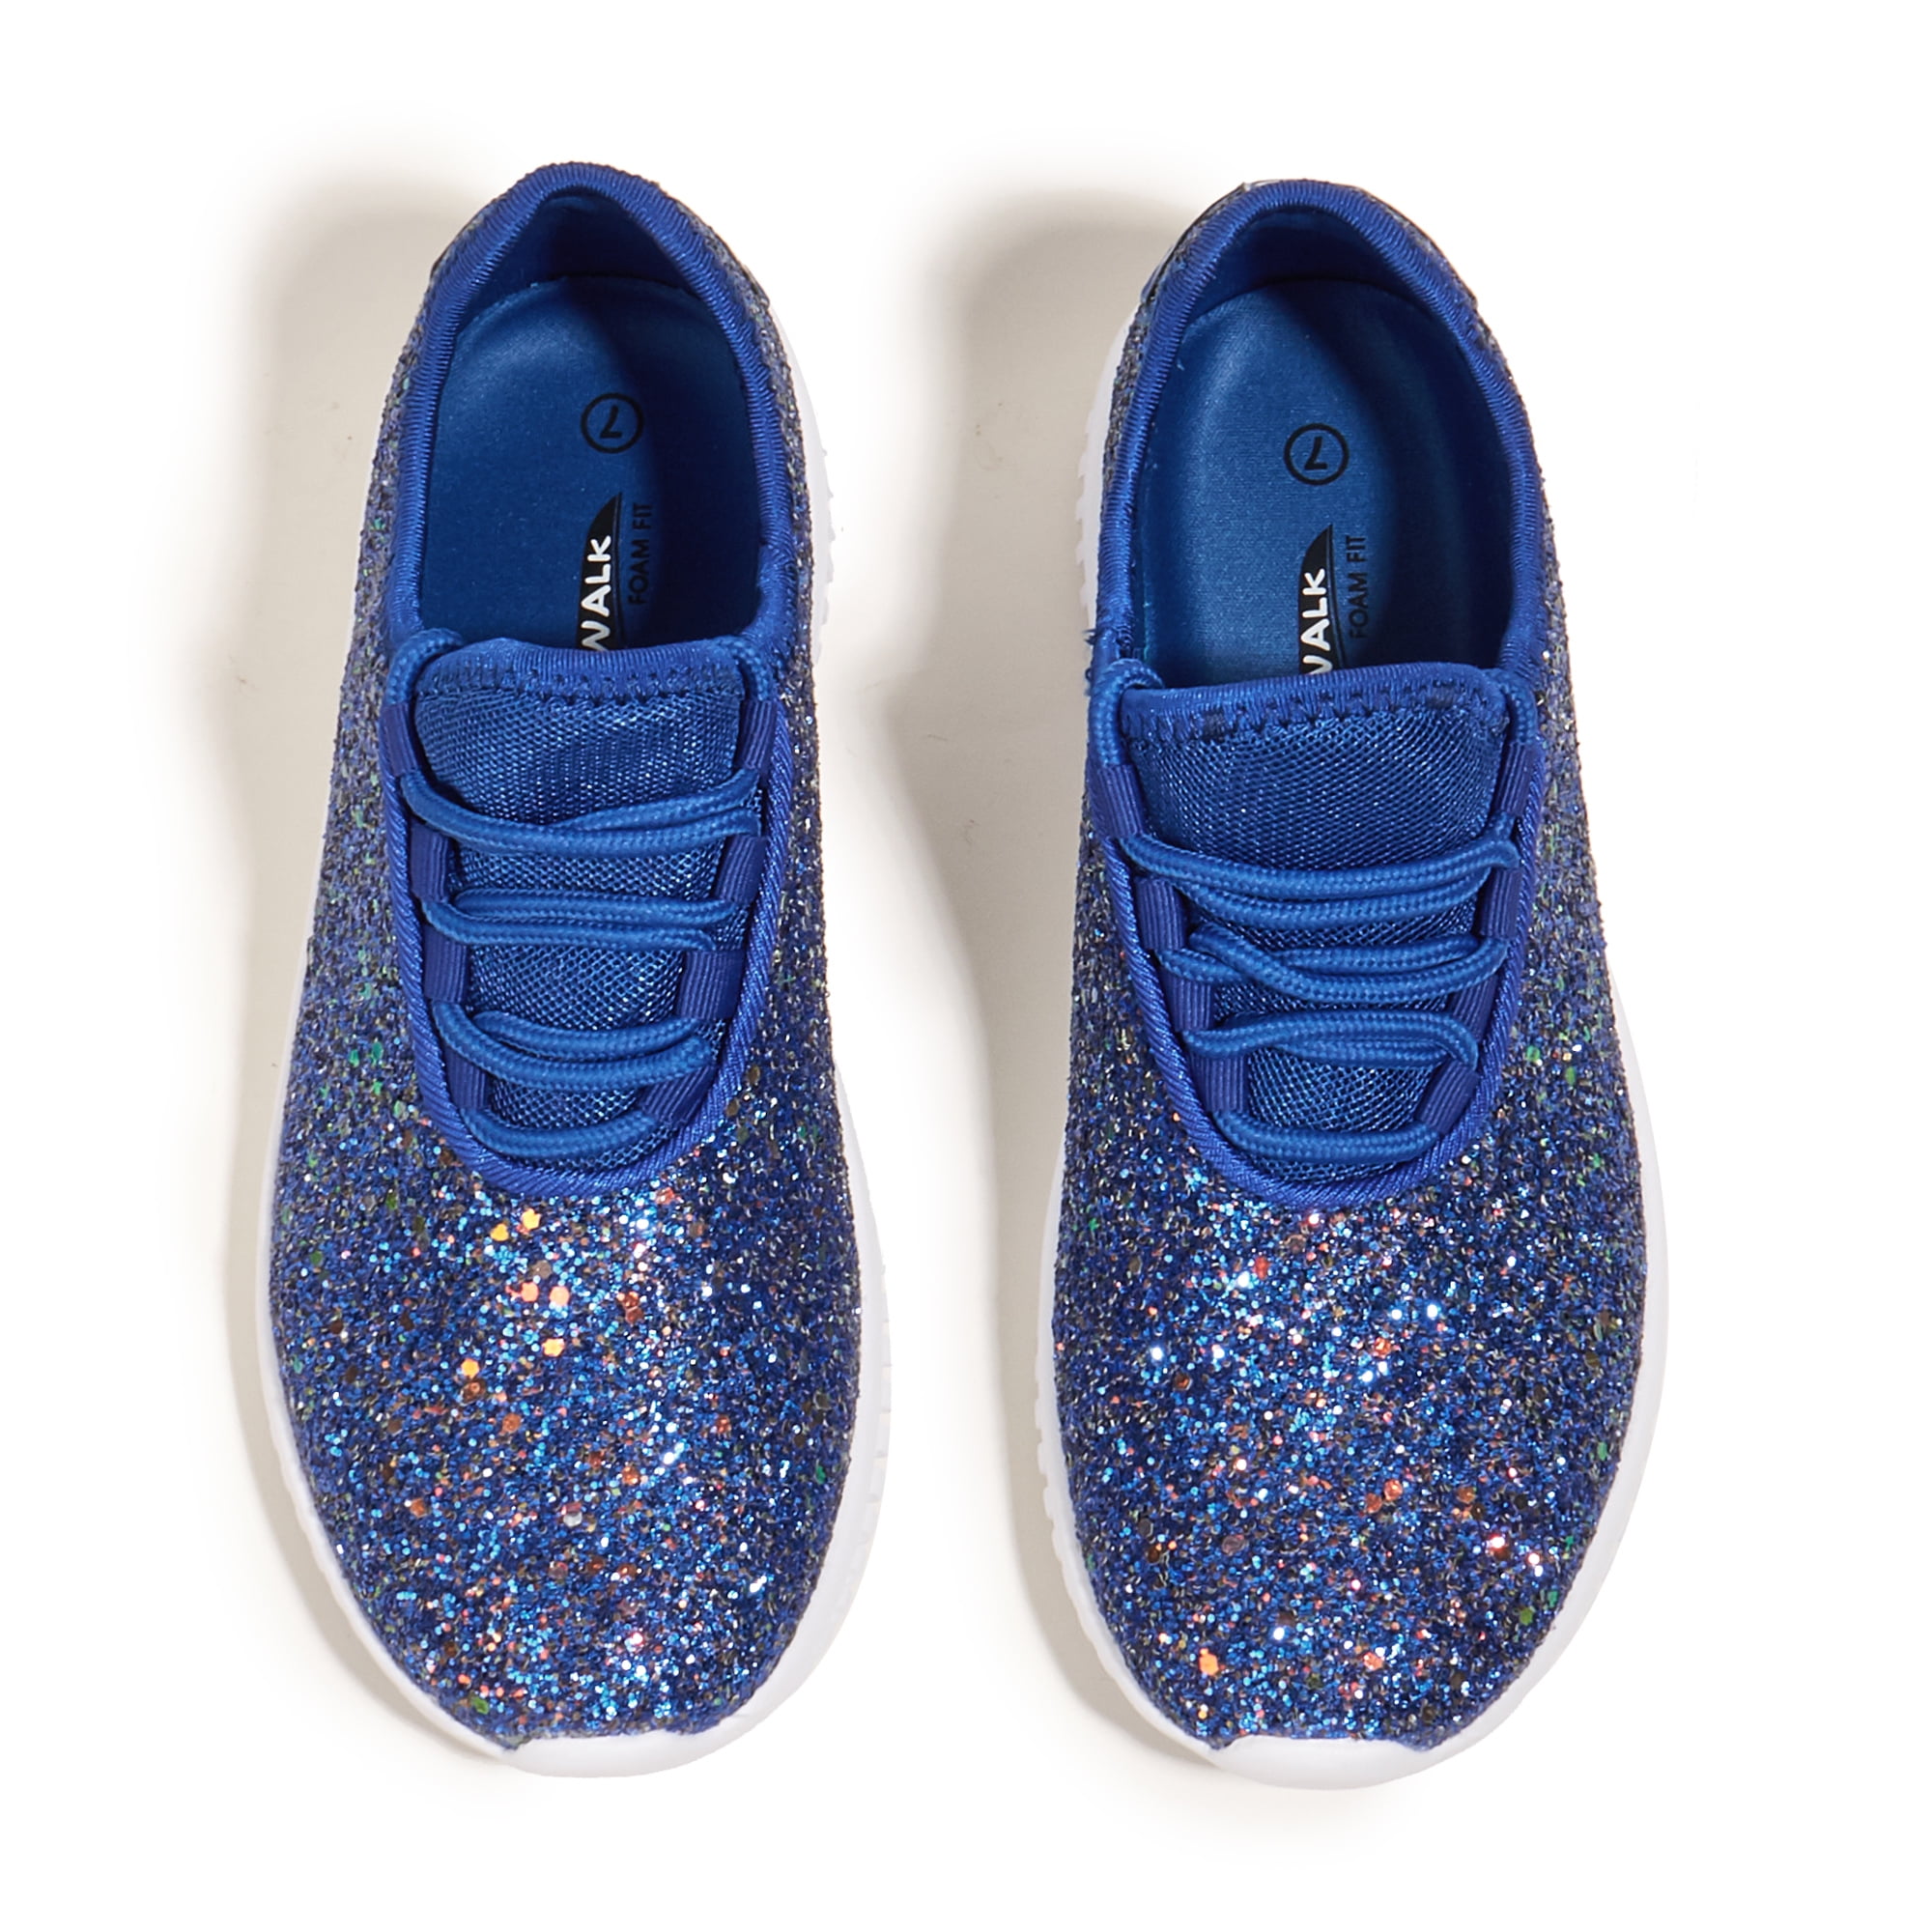 LUCKY STEP Fashion Glitter Sneakers for Womens/Girls Silp On